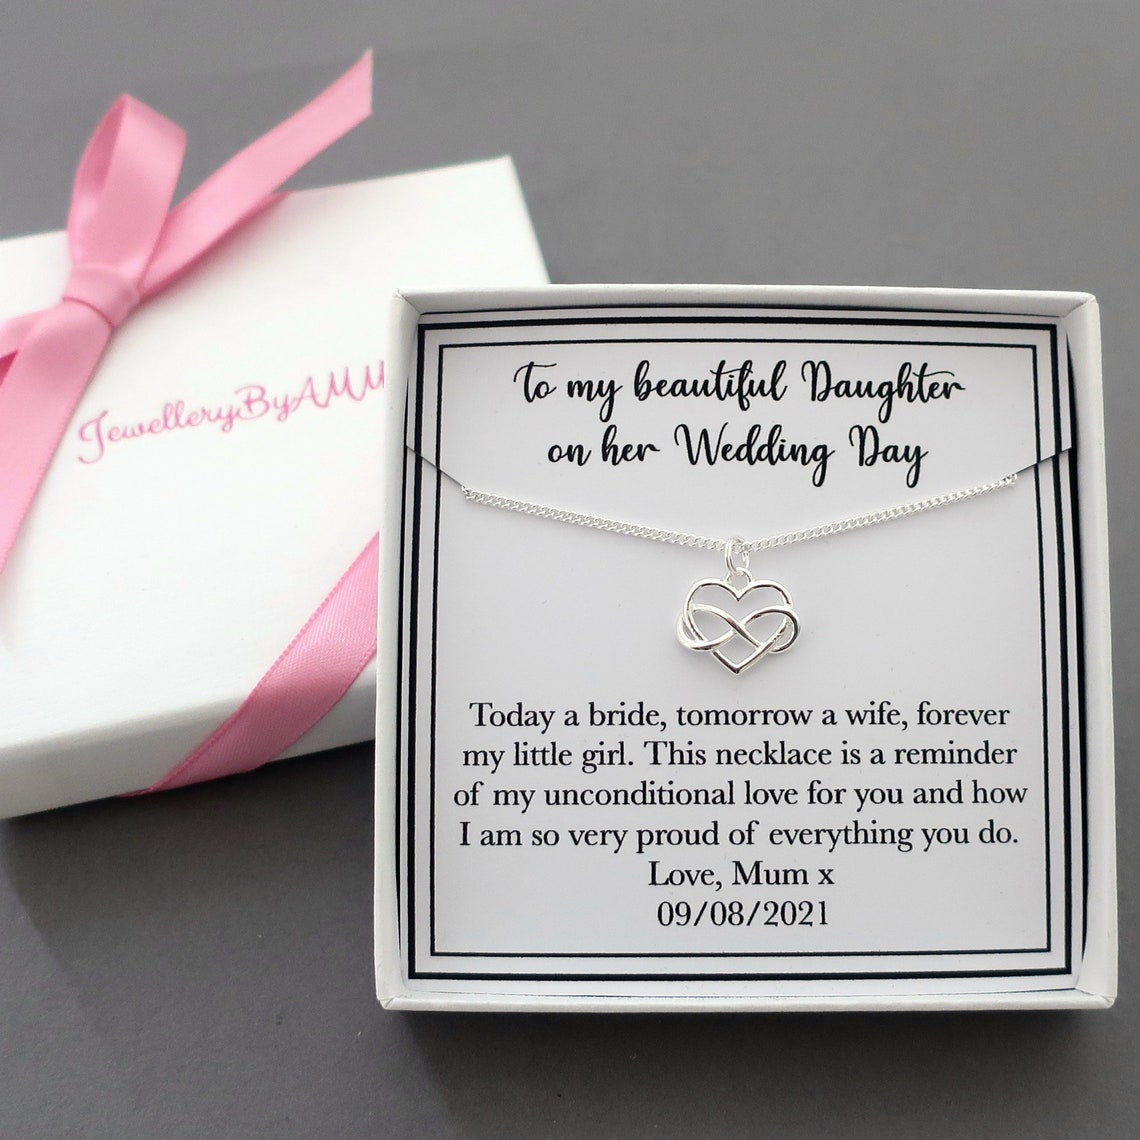 Daughter bride wedding gift from mum for daughter daughter | Etsy